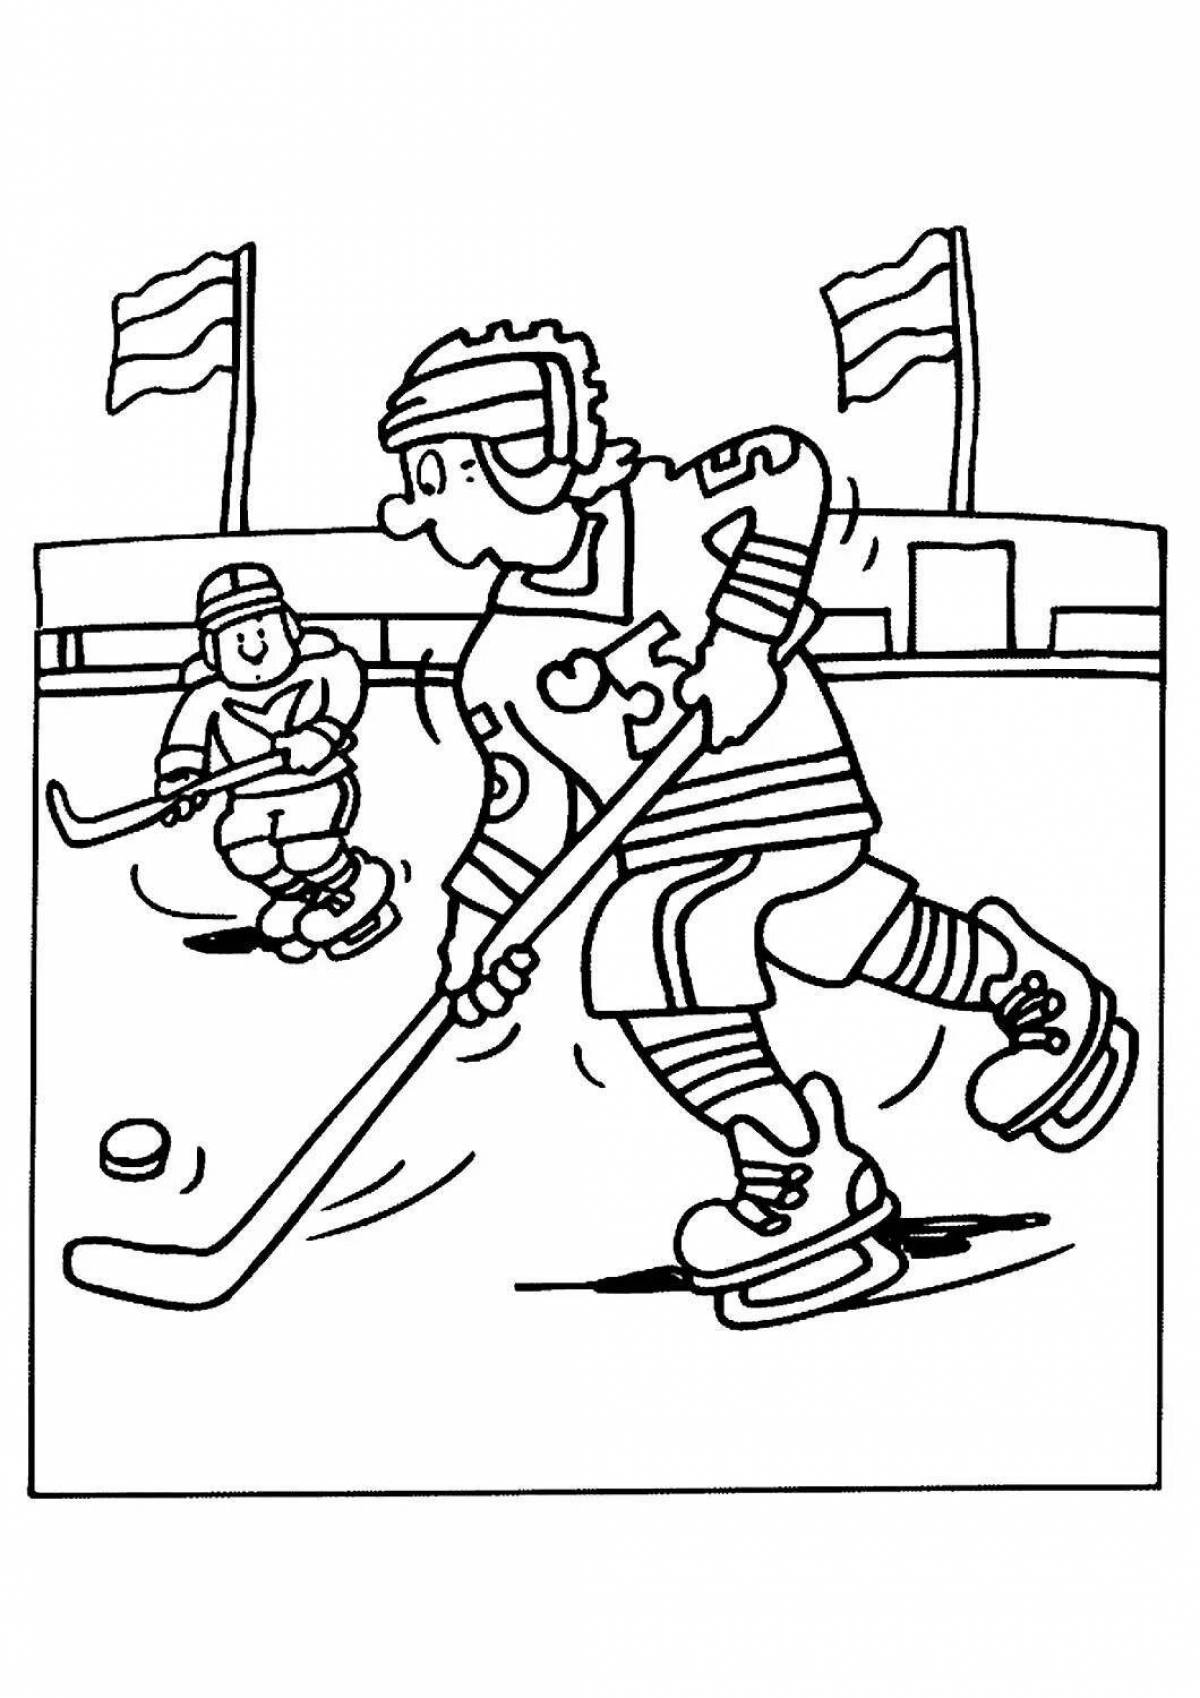 Great sports coloring book for kids